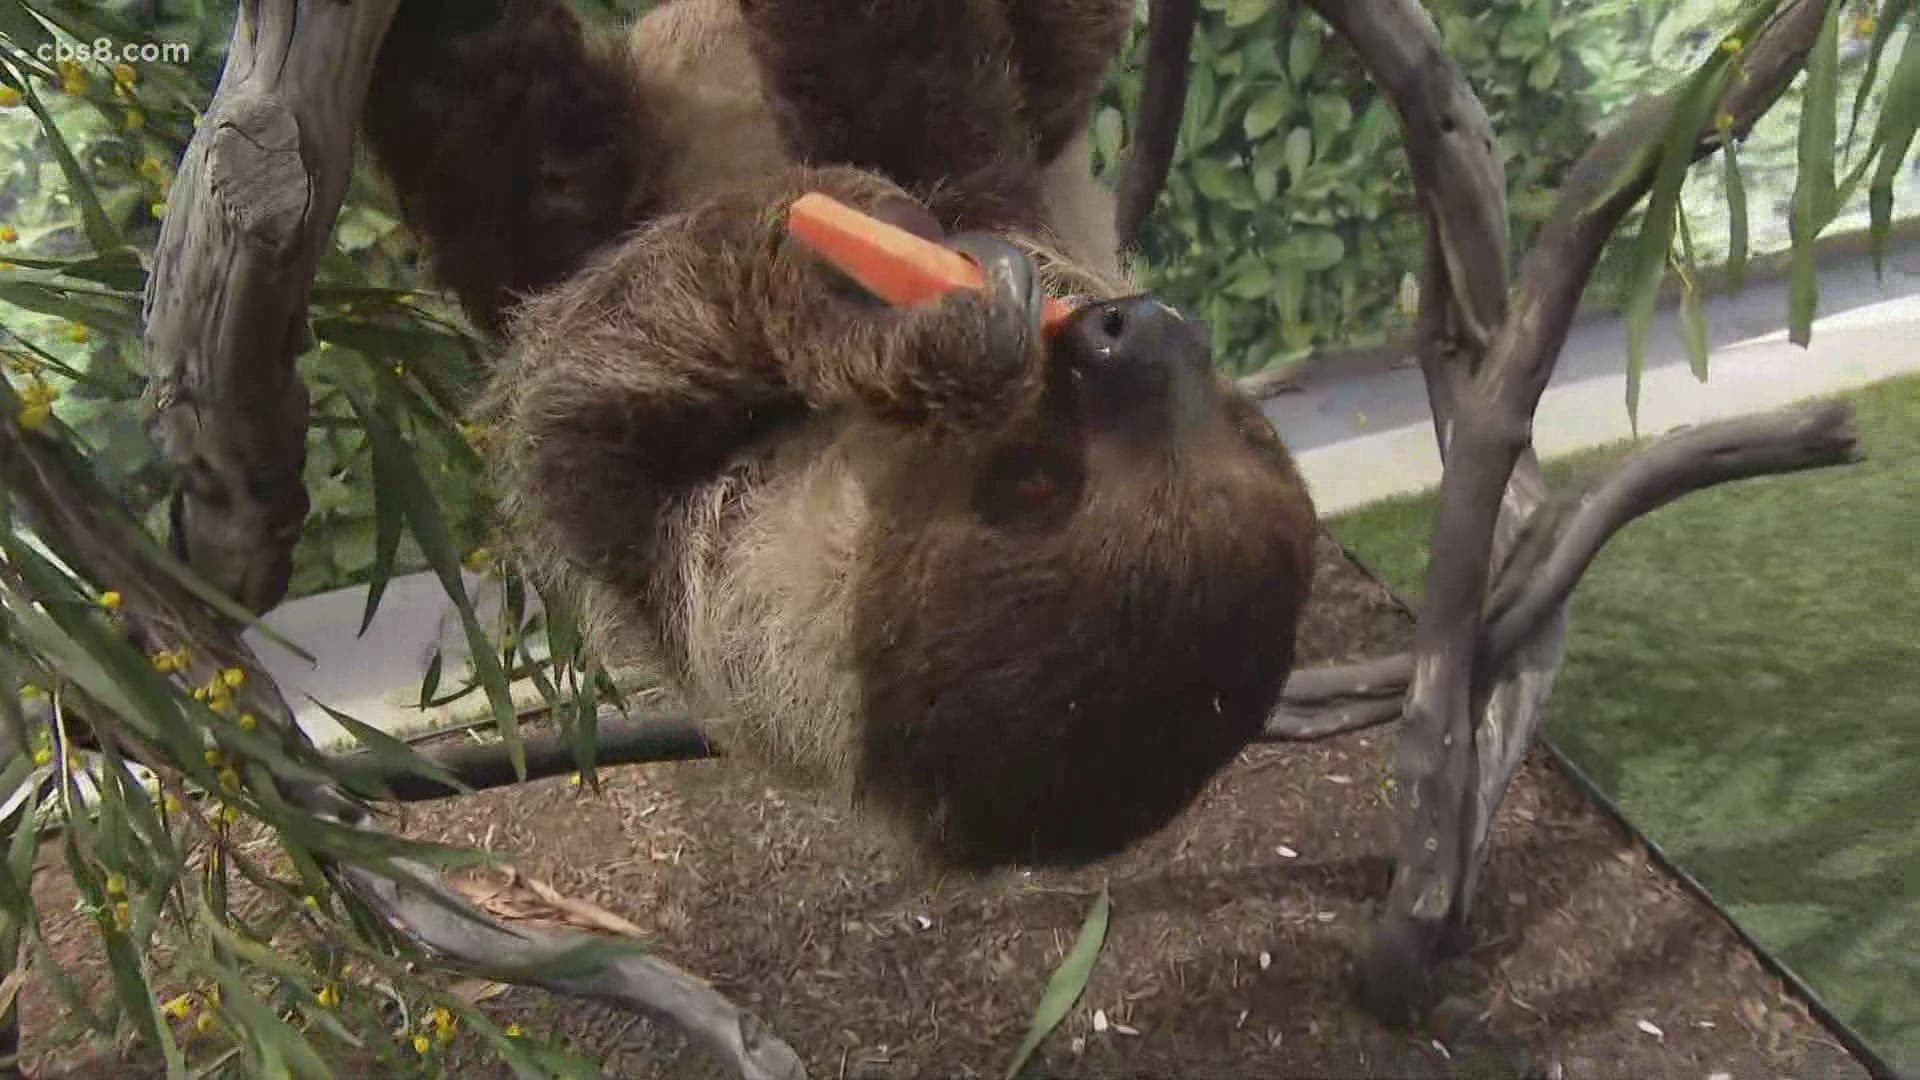 Estrella the Two-Toed Sloth along with keeper Missy joined the show to talk about sloths and what is happening at both the Zoo and Safari Park.